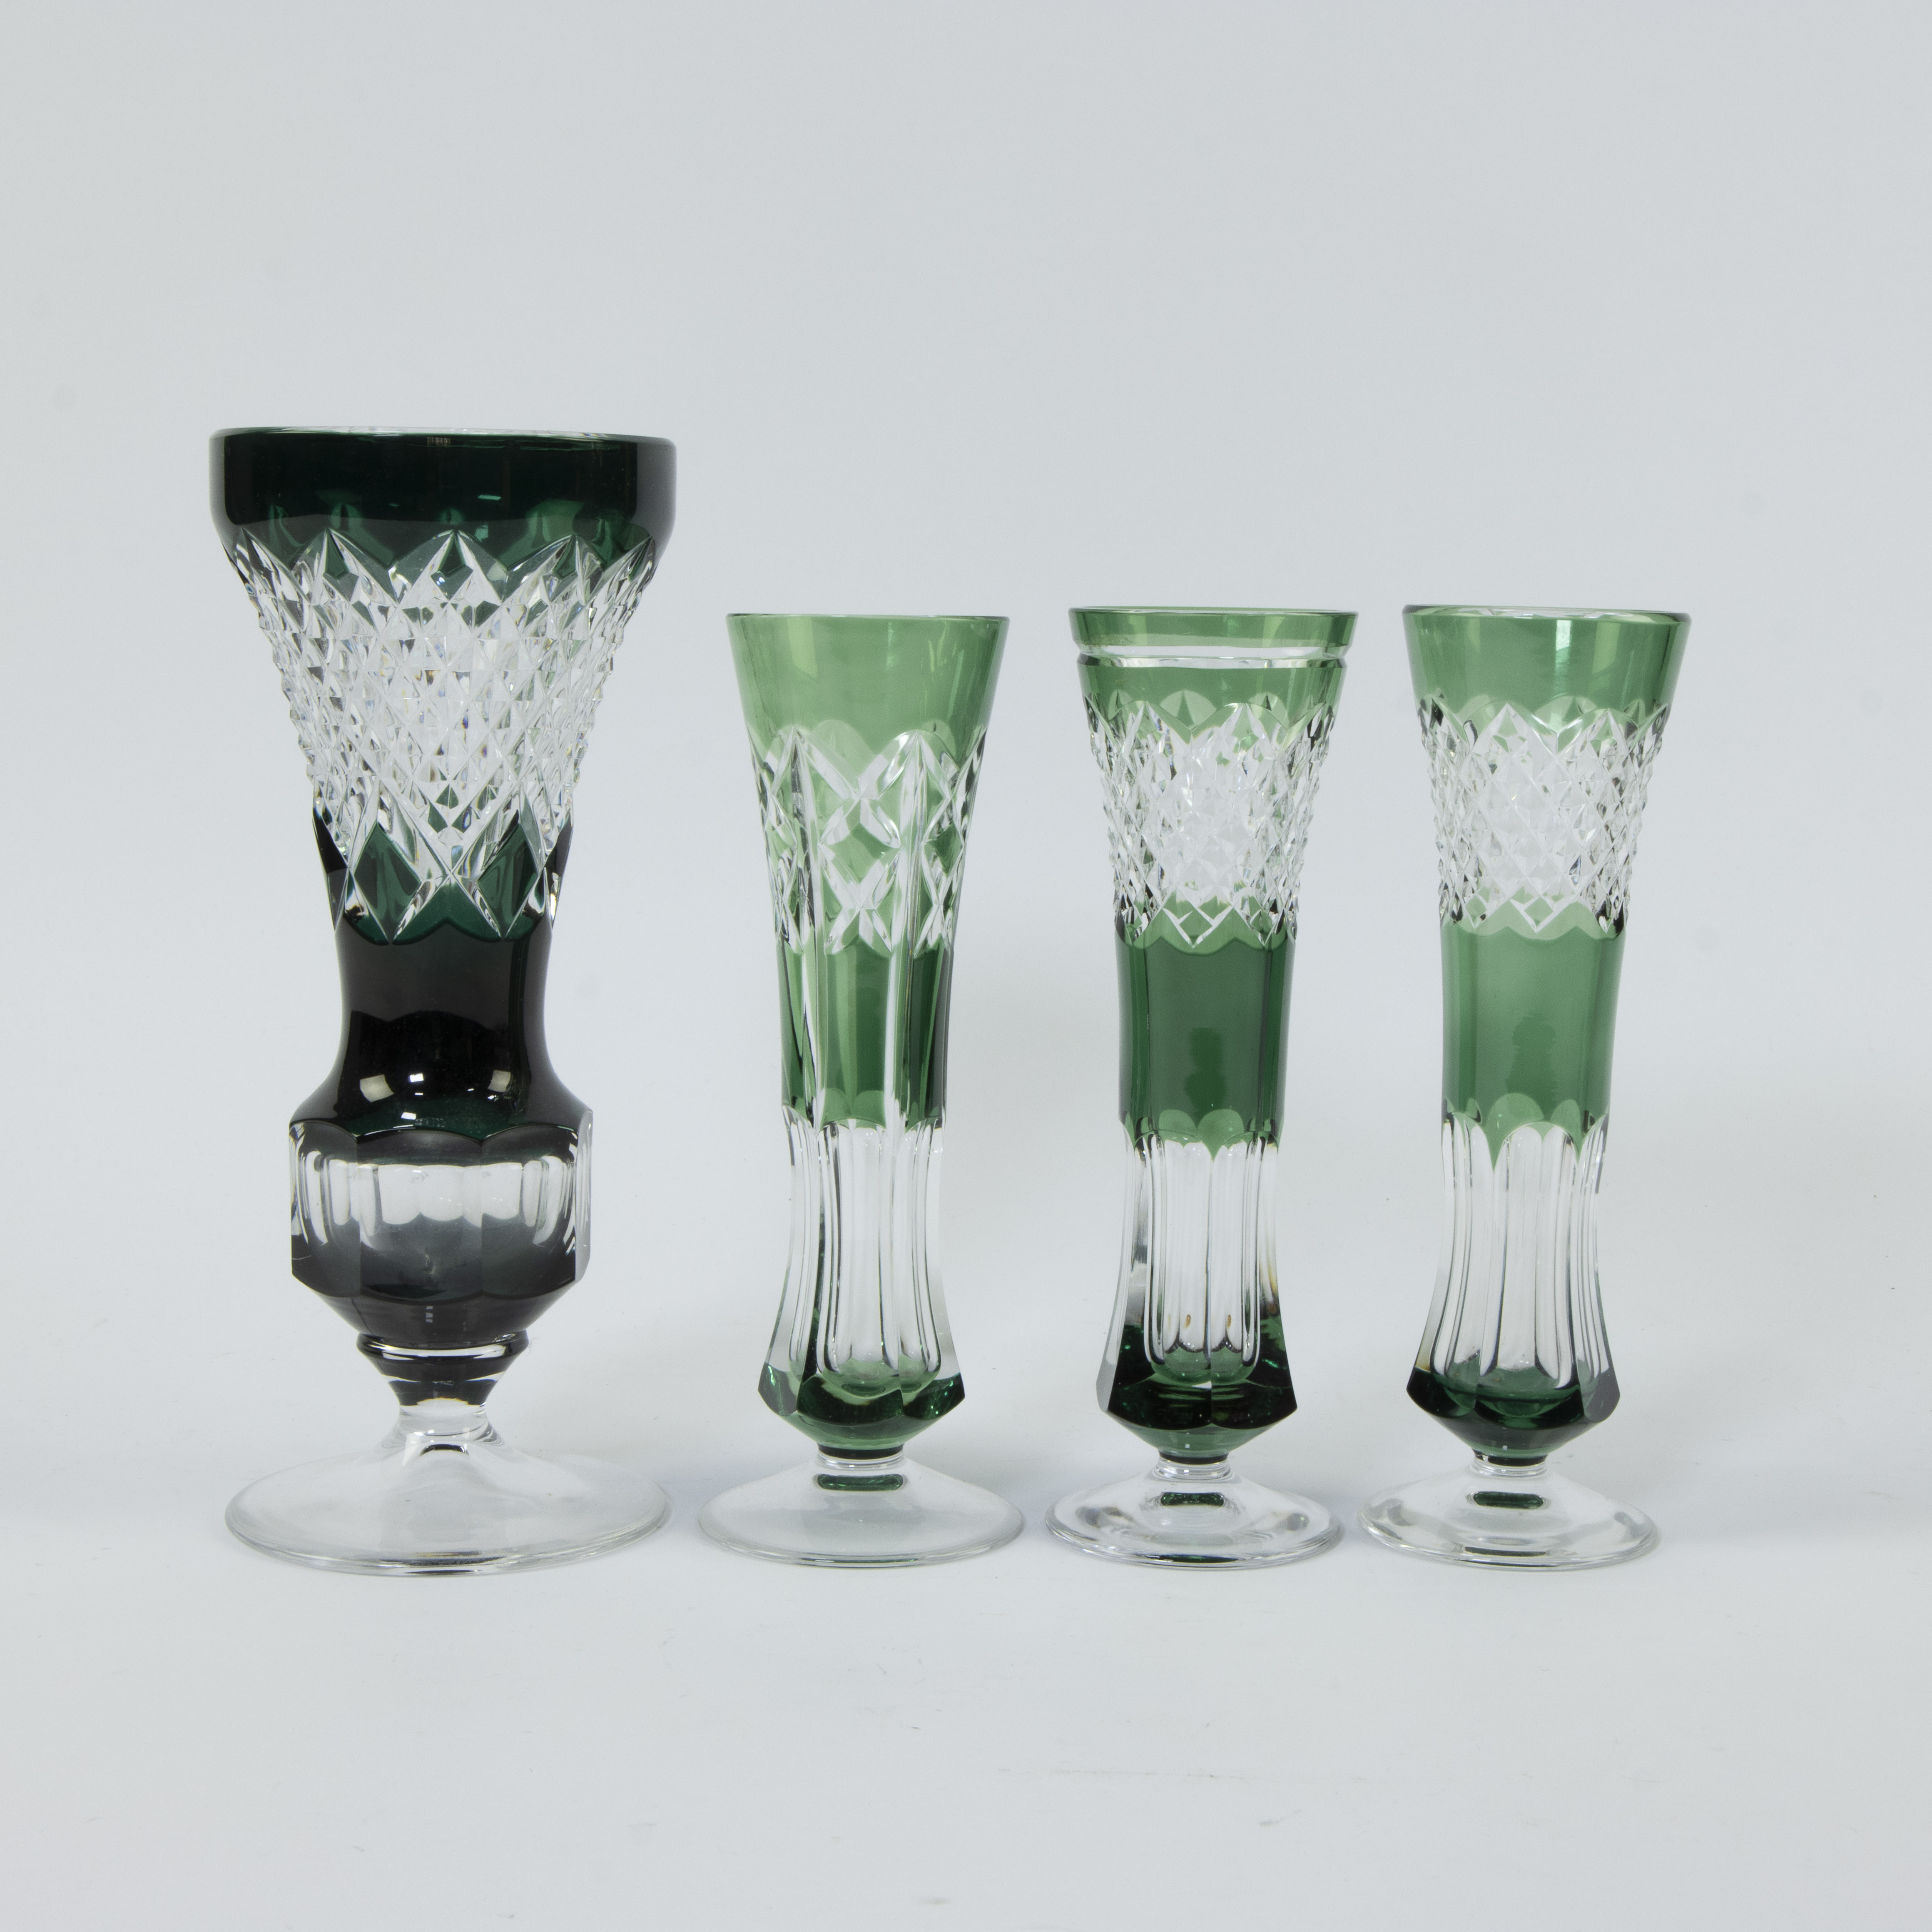 Collection of 4 green and clear cut crystal vases Val Saint Lambert - Image 4 of 4